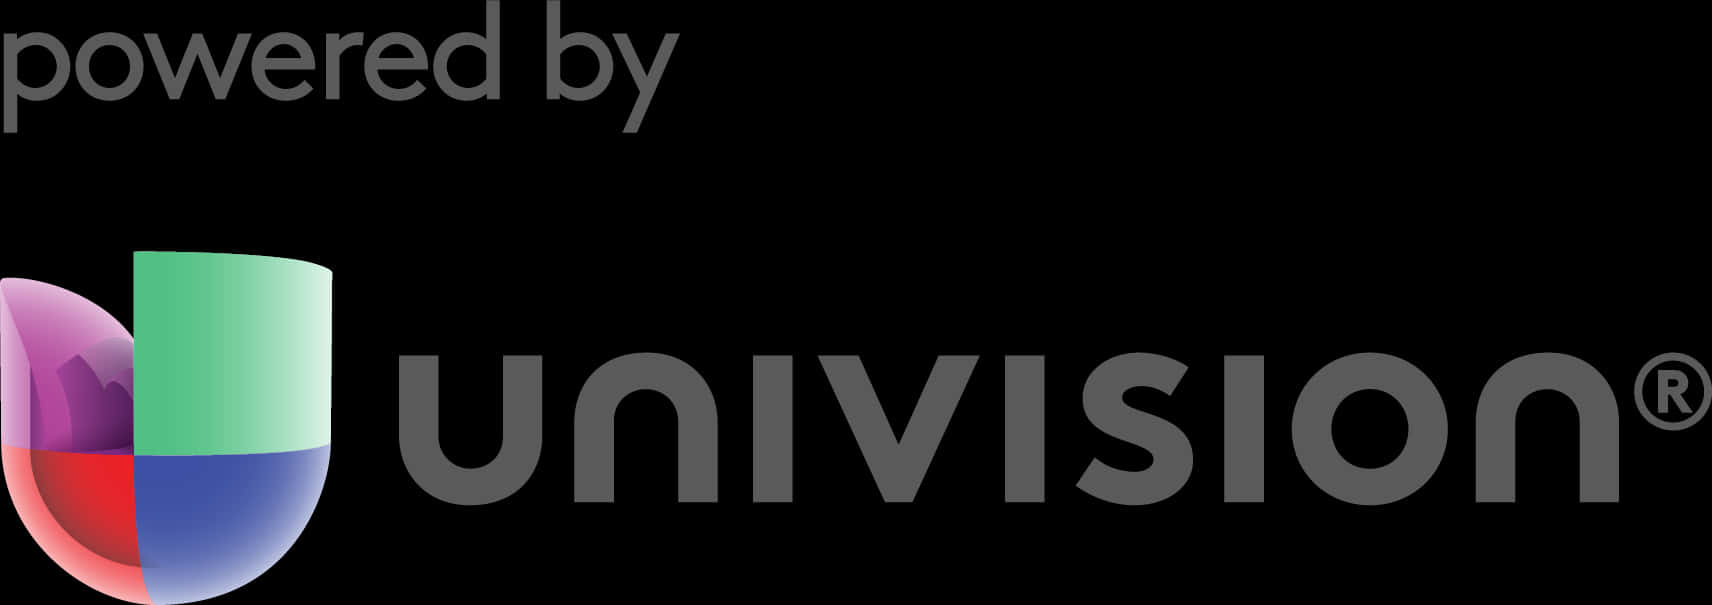 Univision Powered By Logo PNG